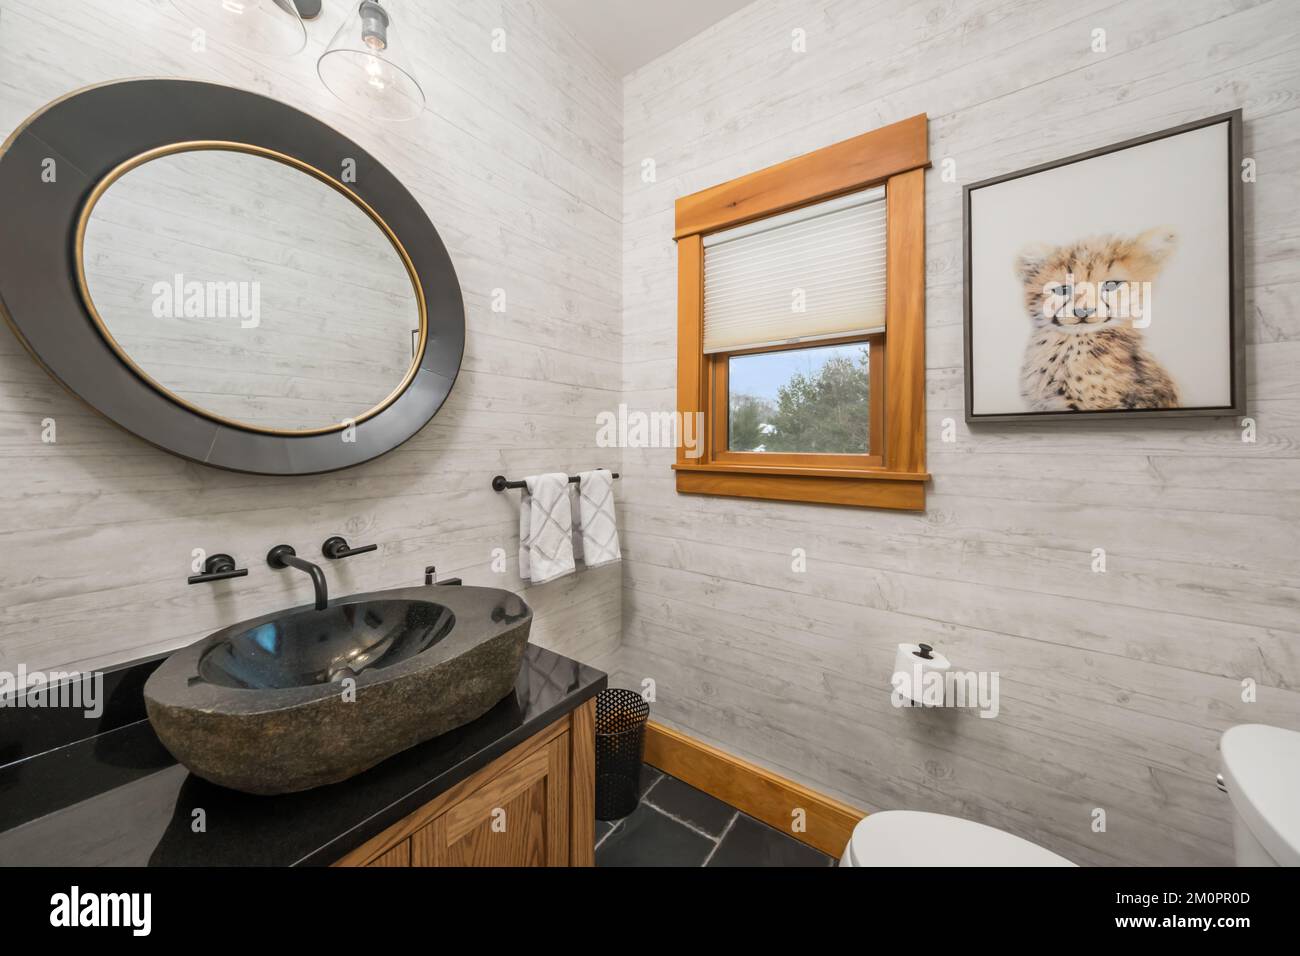 An interior of a modern bathroom with a beautiful design Stock Photo